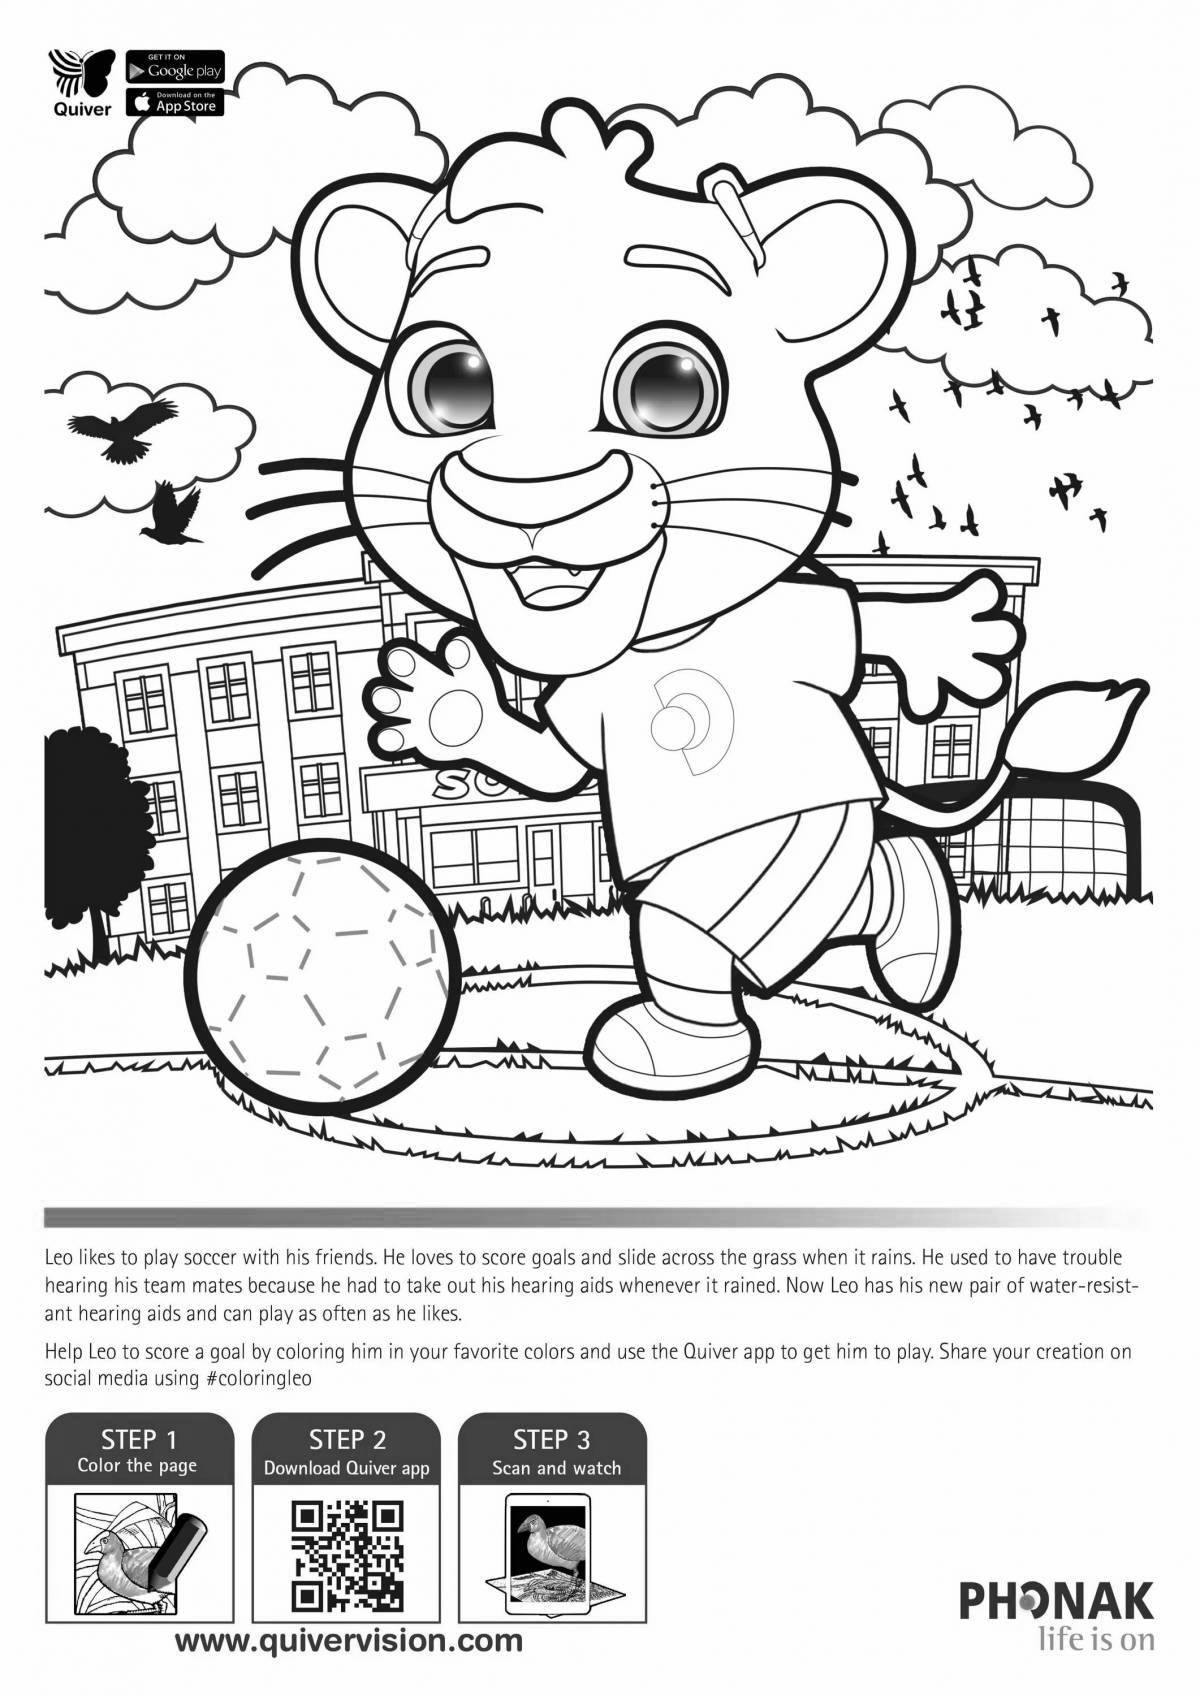 Amazing Quiver coloring page